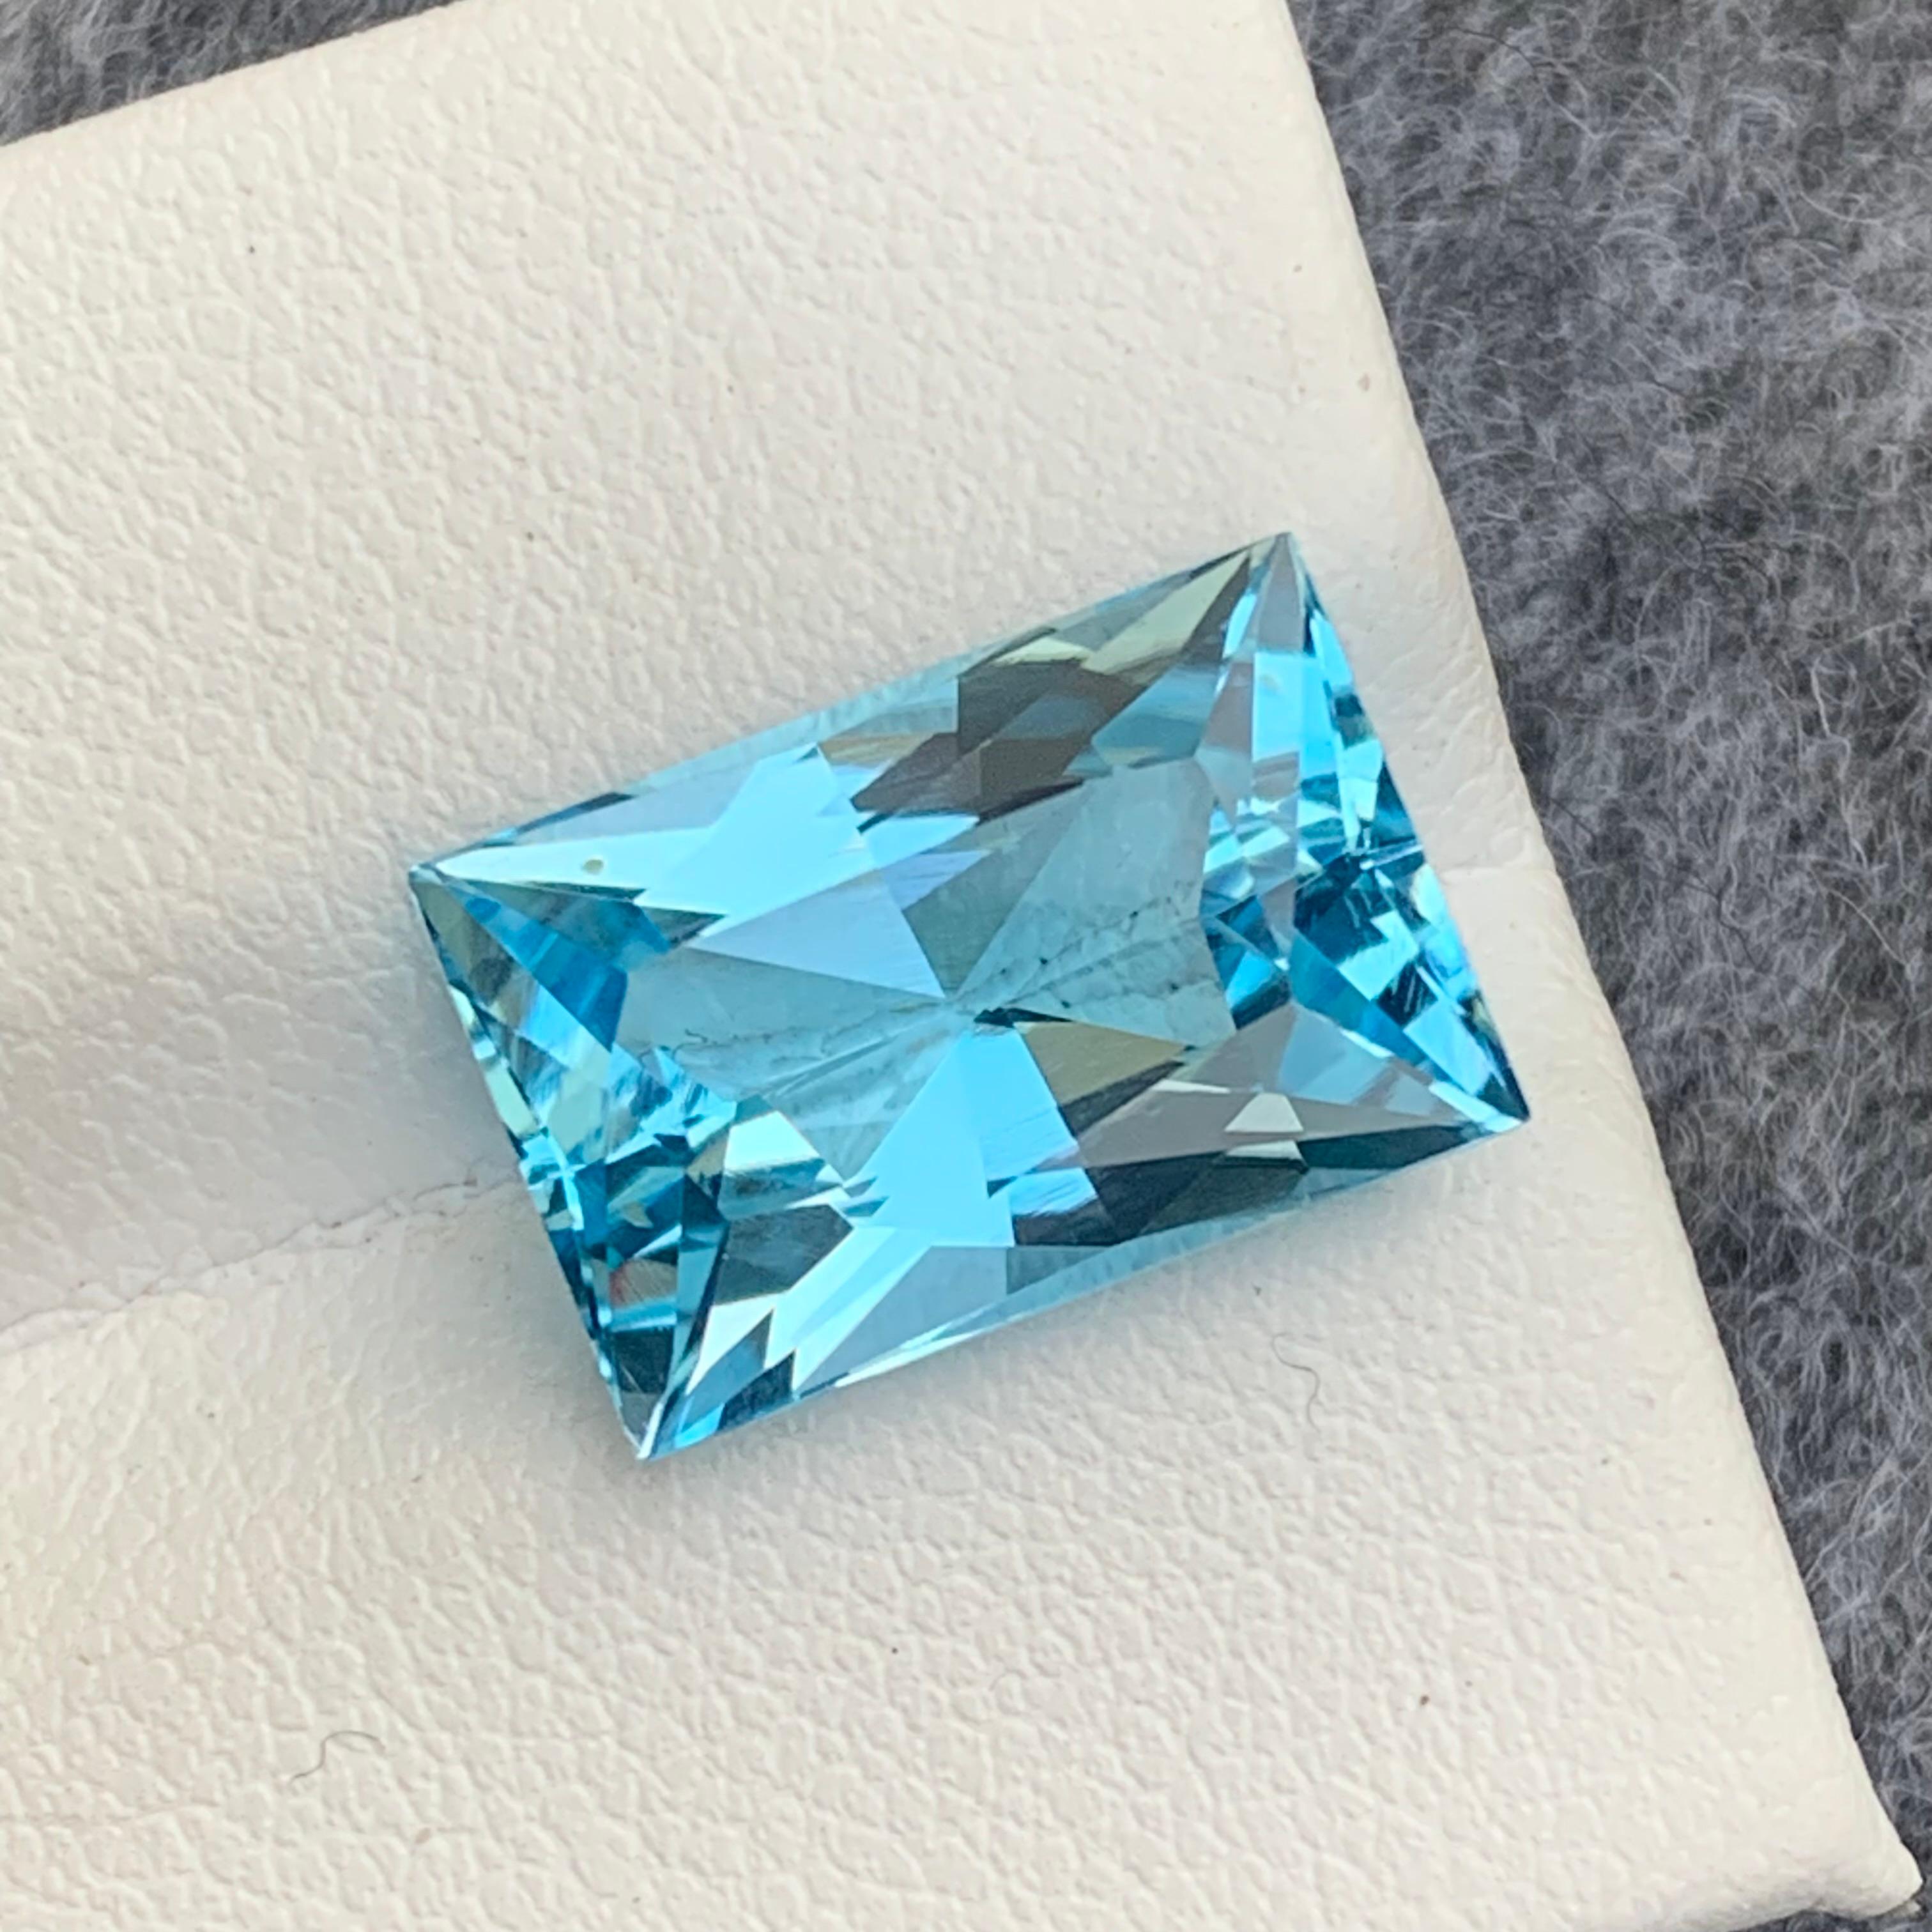 Faceted Sky Blue Topaz 
Weight : 8.50 Carats
Dimensions : 14.1x9.4x6.8 Mm
Origin : Brazil
Clarity : Loupe Clean
Shape: Baguette 
Color: Blue
Certificate: On Demand
.
Blue Topaz Metaphysical Properties
Blue topaz, in particular, is believed to